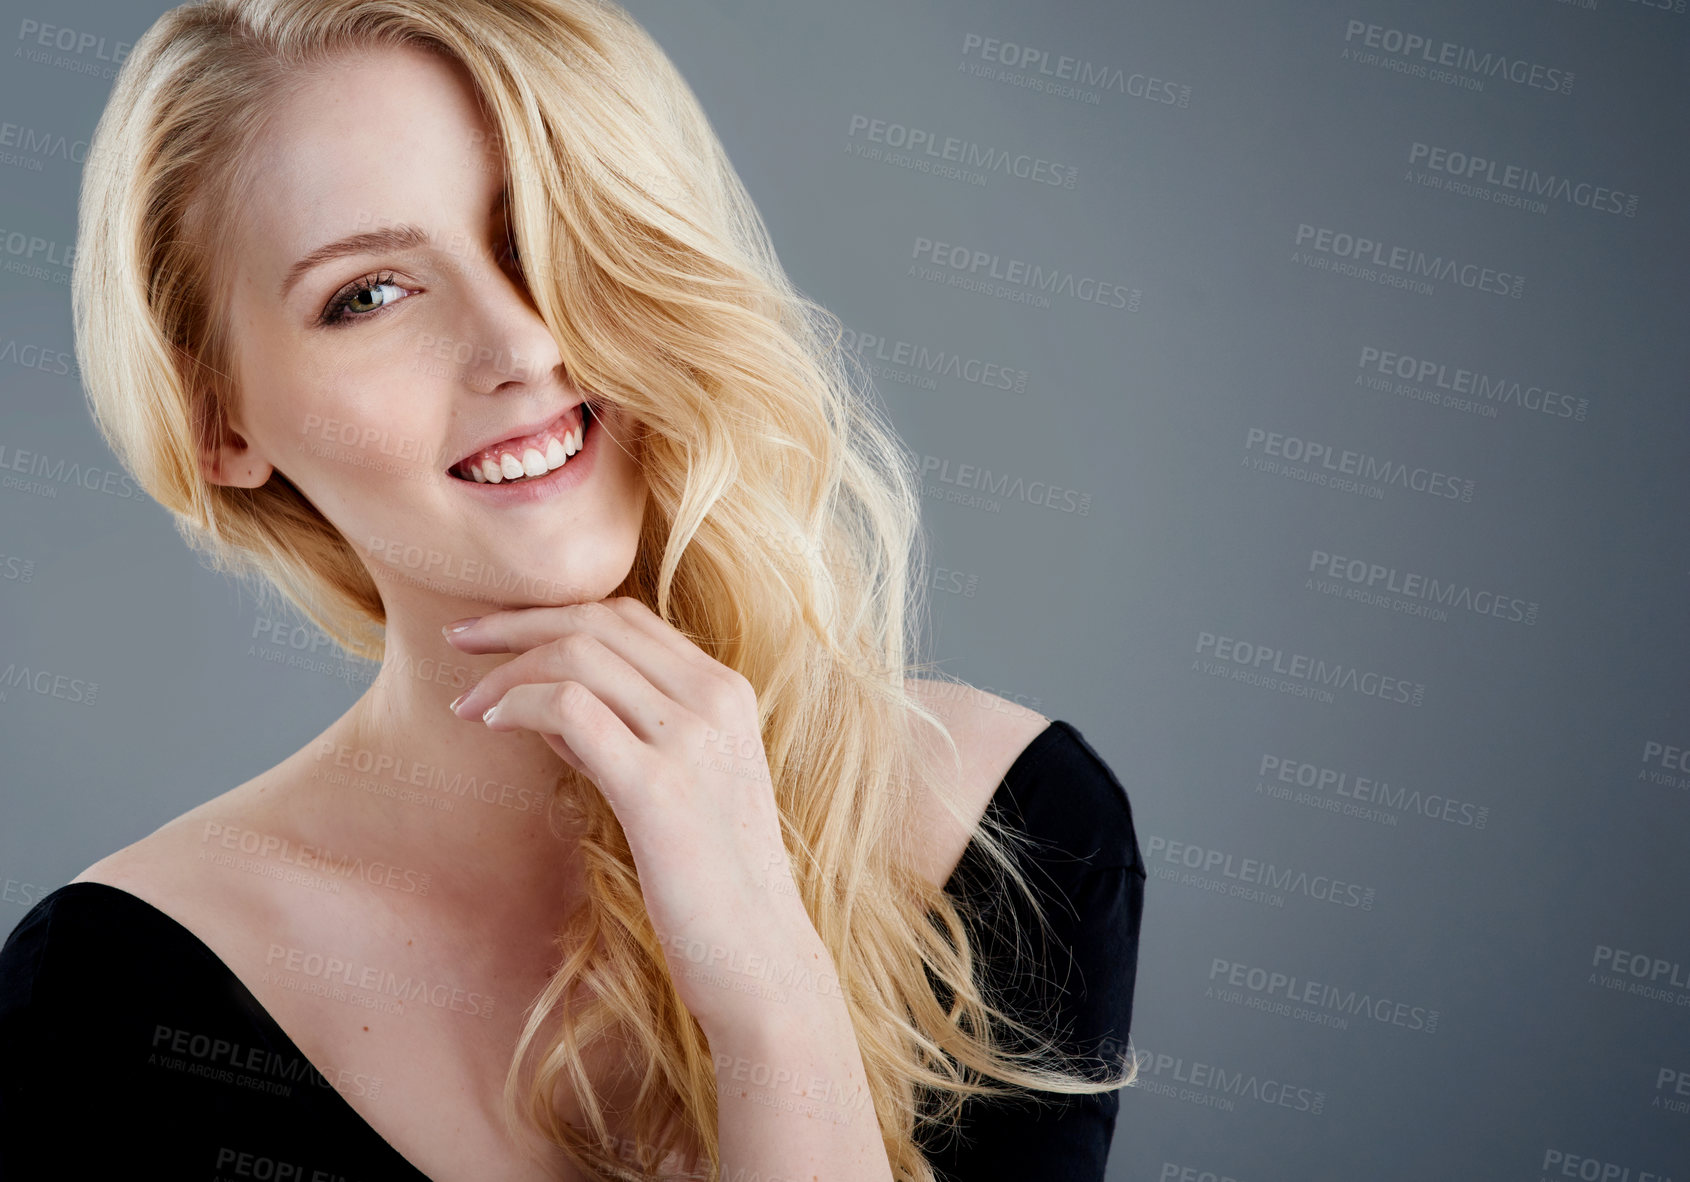 Buy stock photo Studio portrait of an attractive young woman with beautiful long blonde hair posing against a gray background